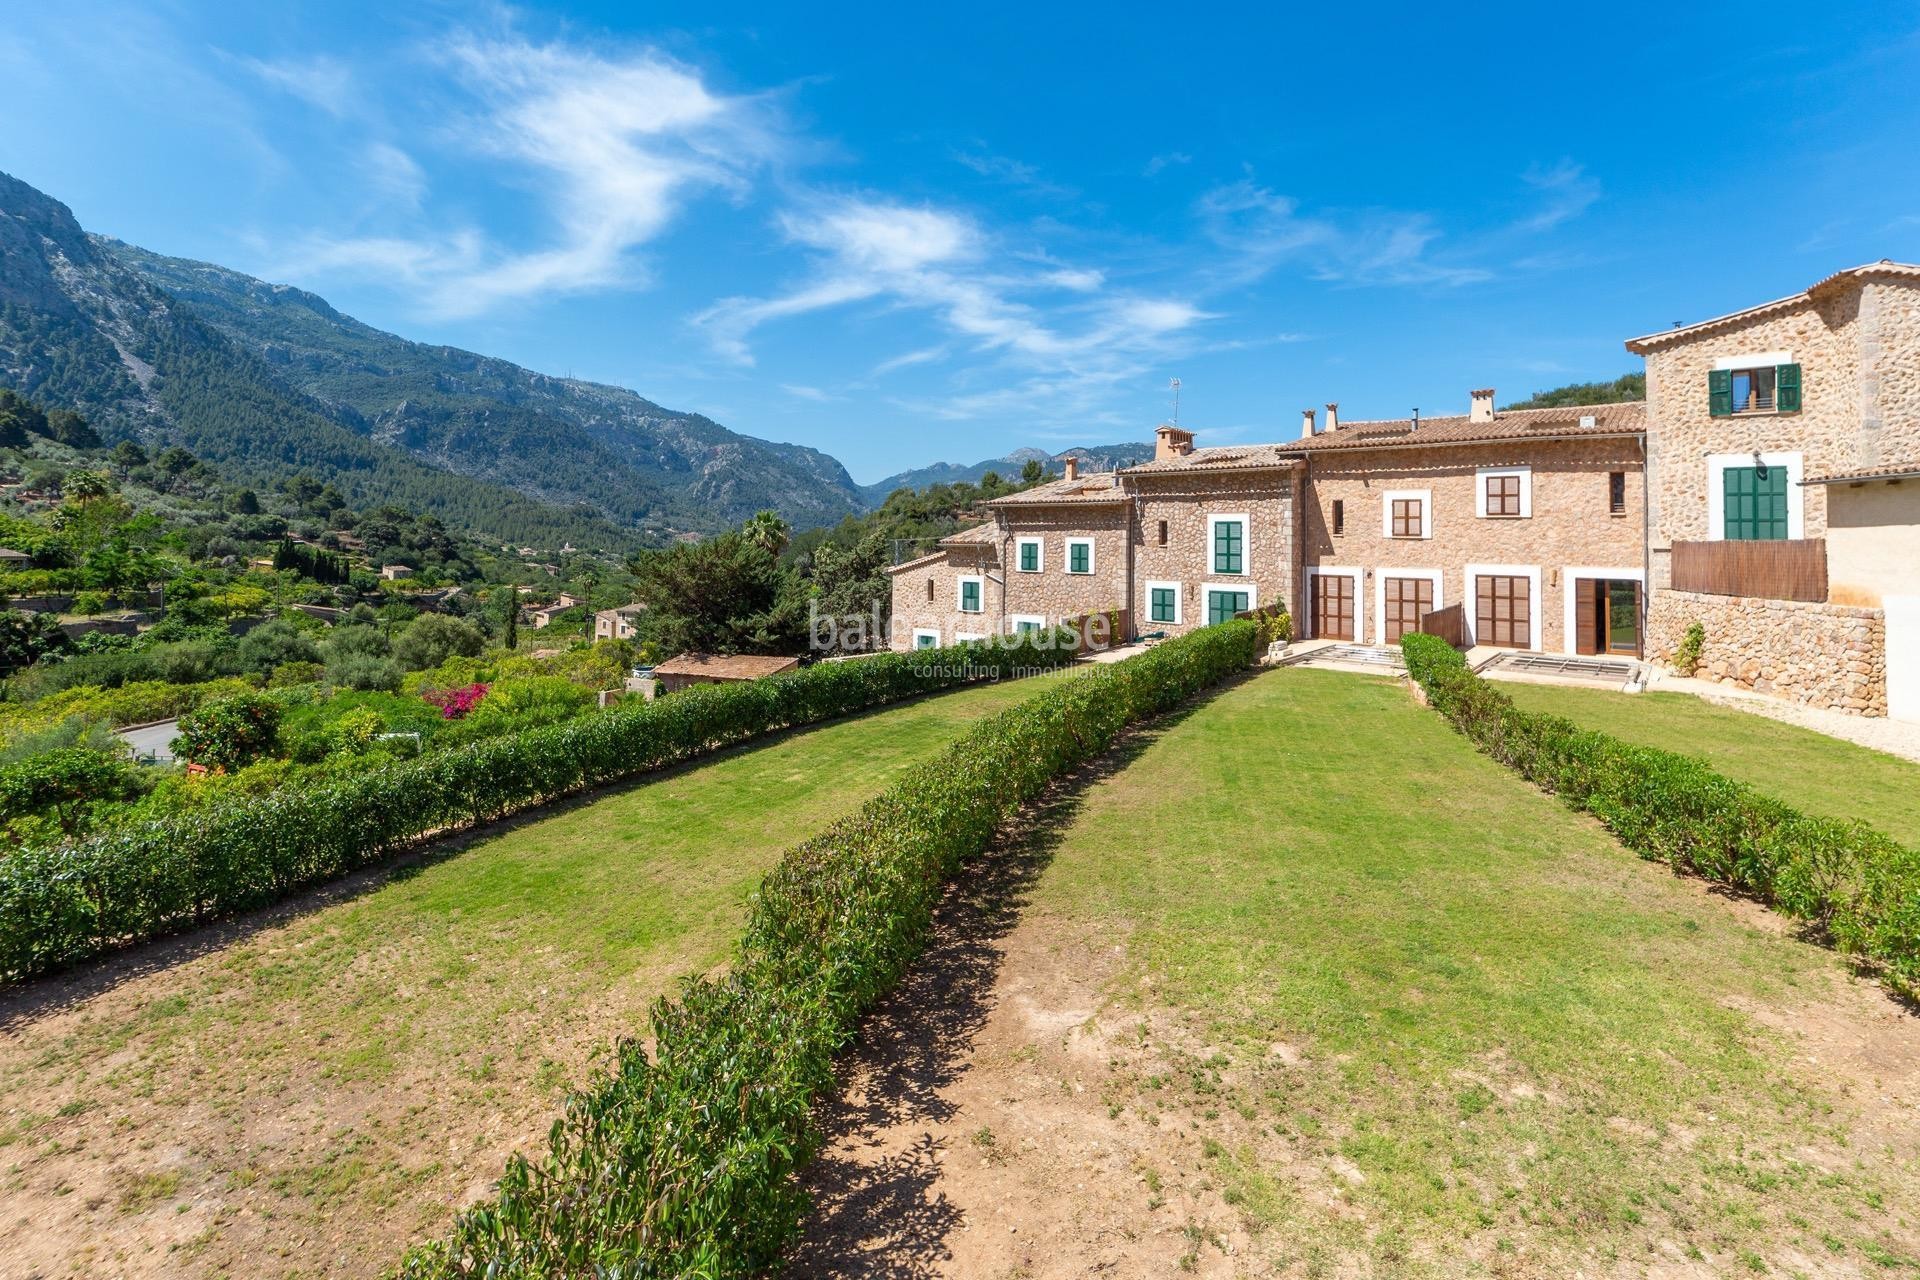 Extraordinary new villa in Fornalutx with stunning views of the Tramuntana